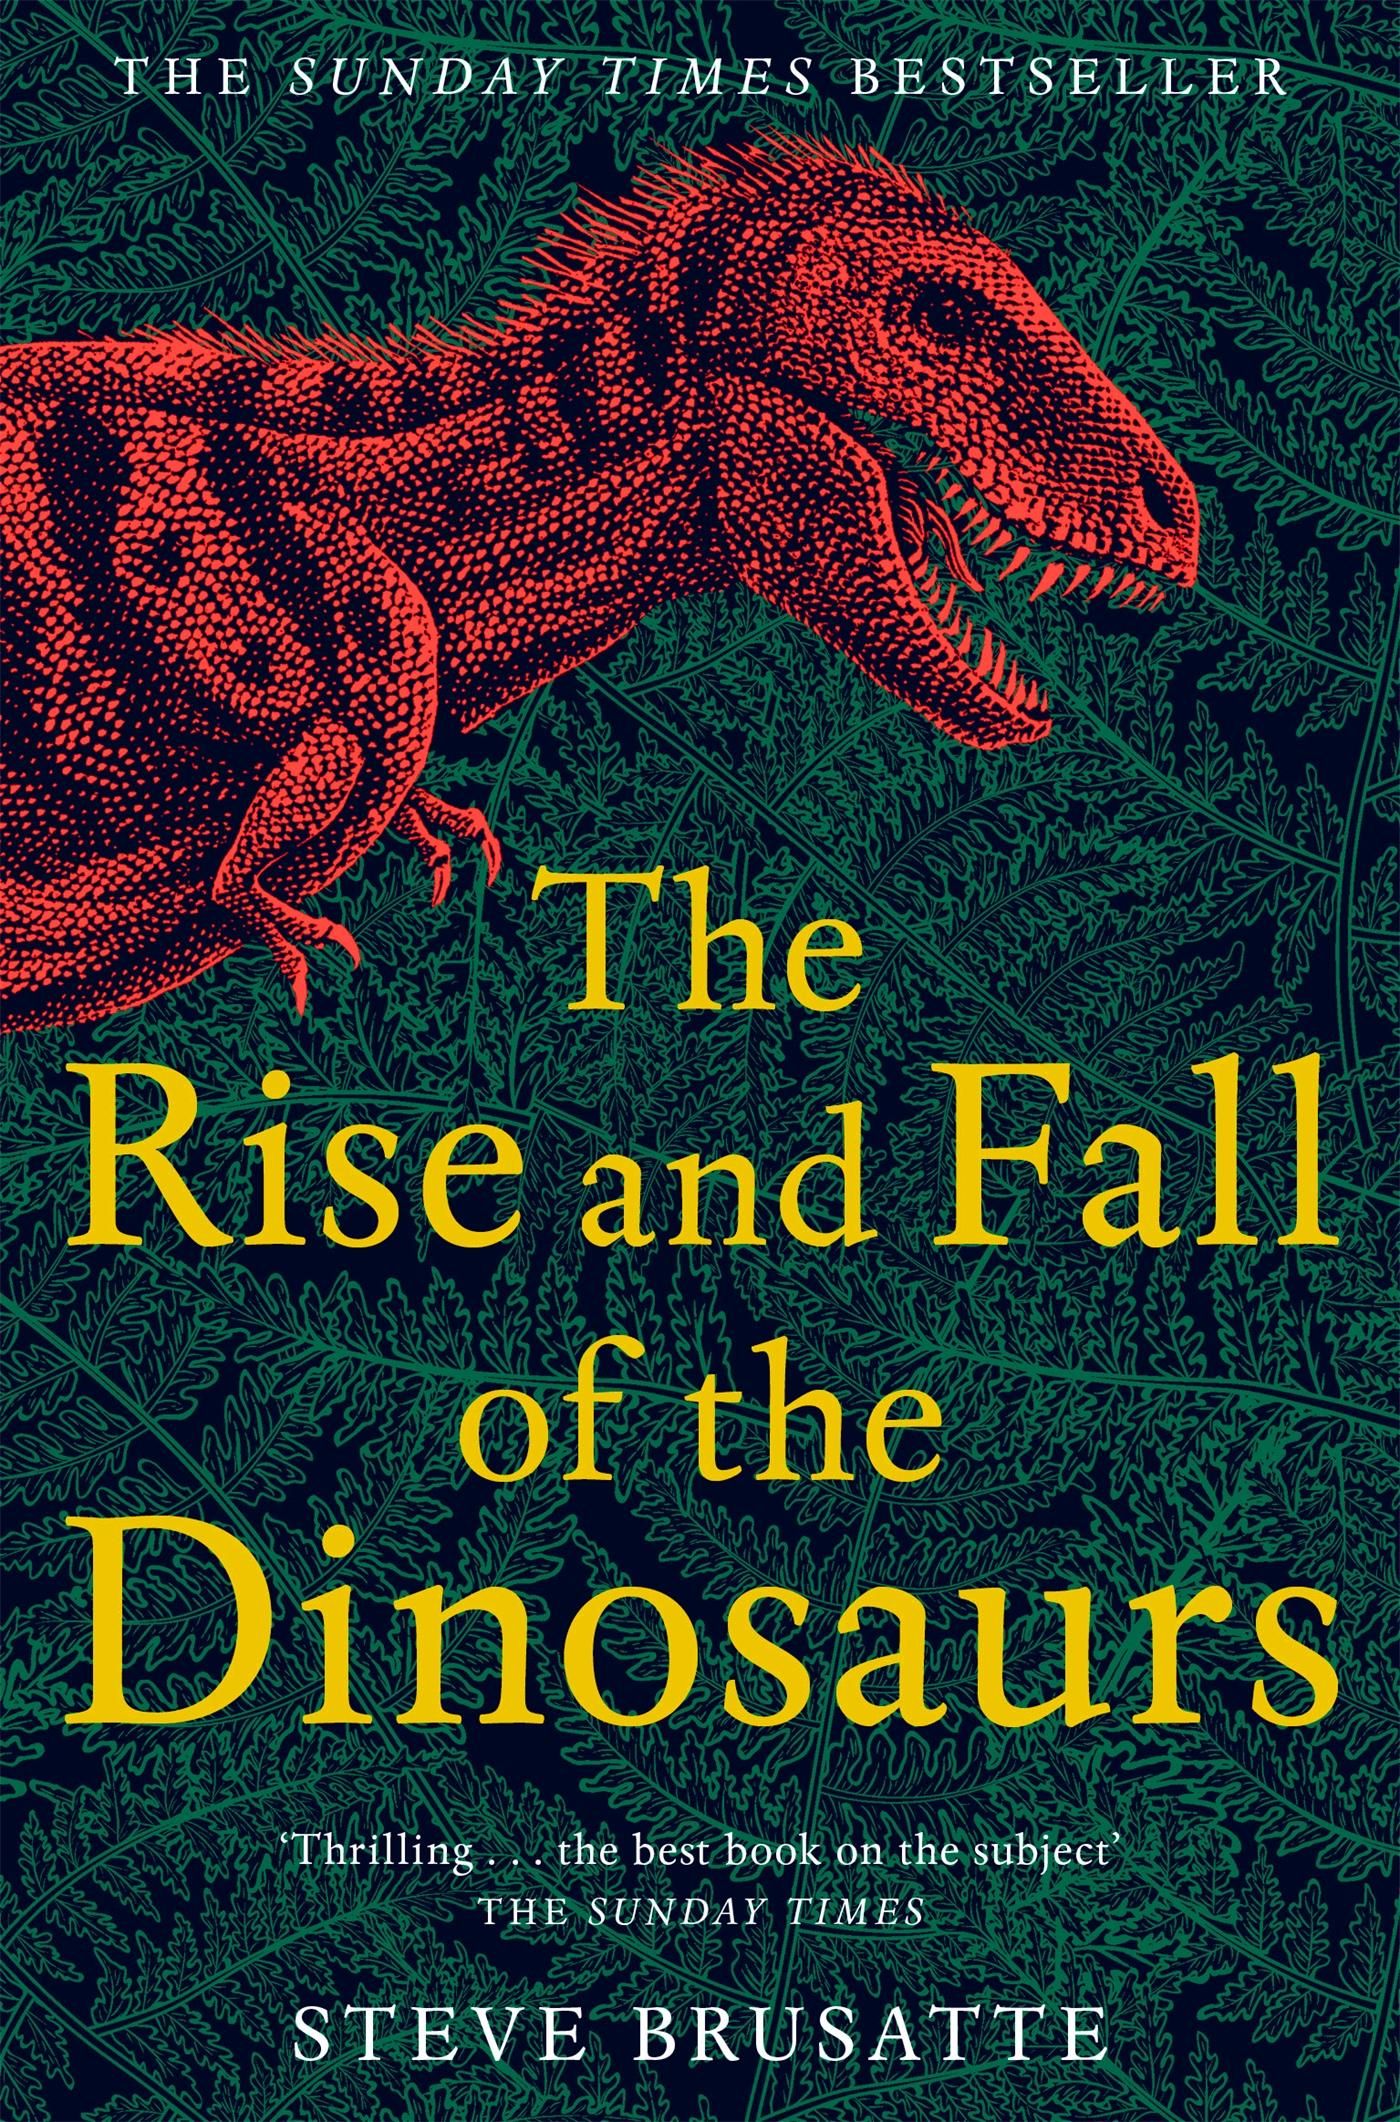 Steve Brusatte: The Rise and Fall of the Dinosaurs (Paperback, 2019, Picador)